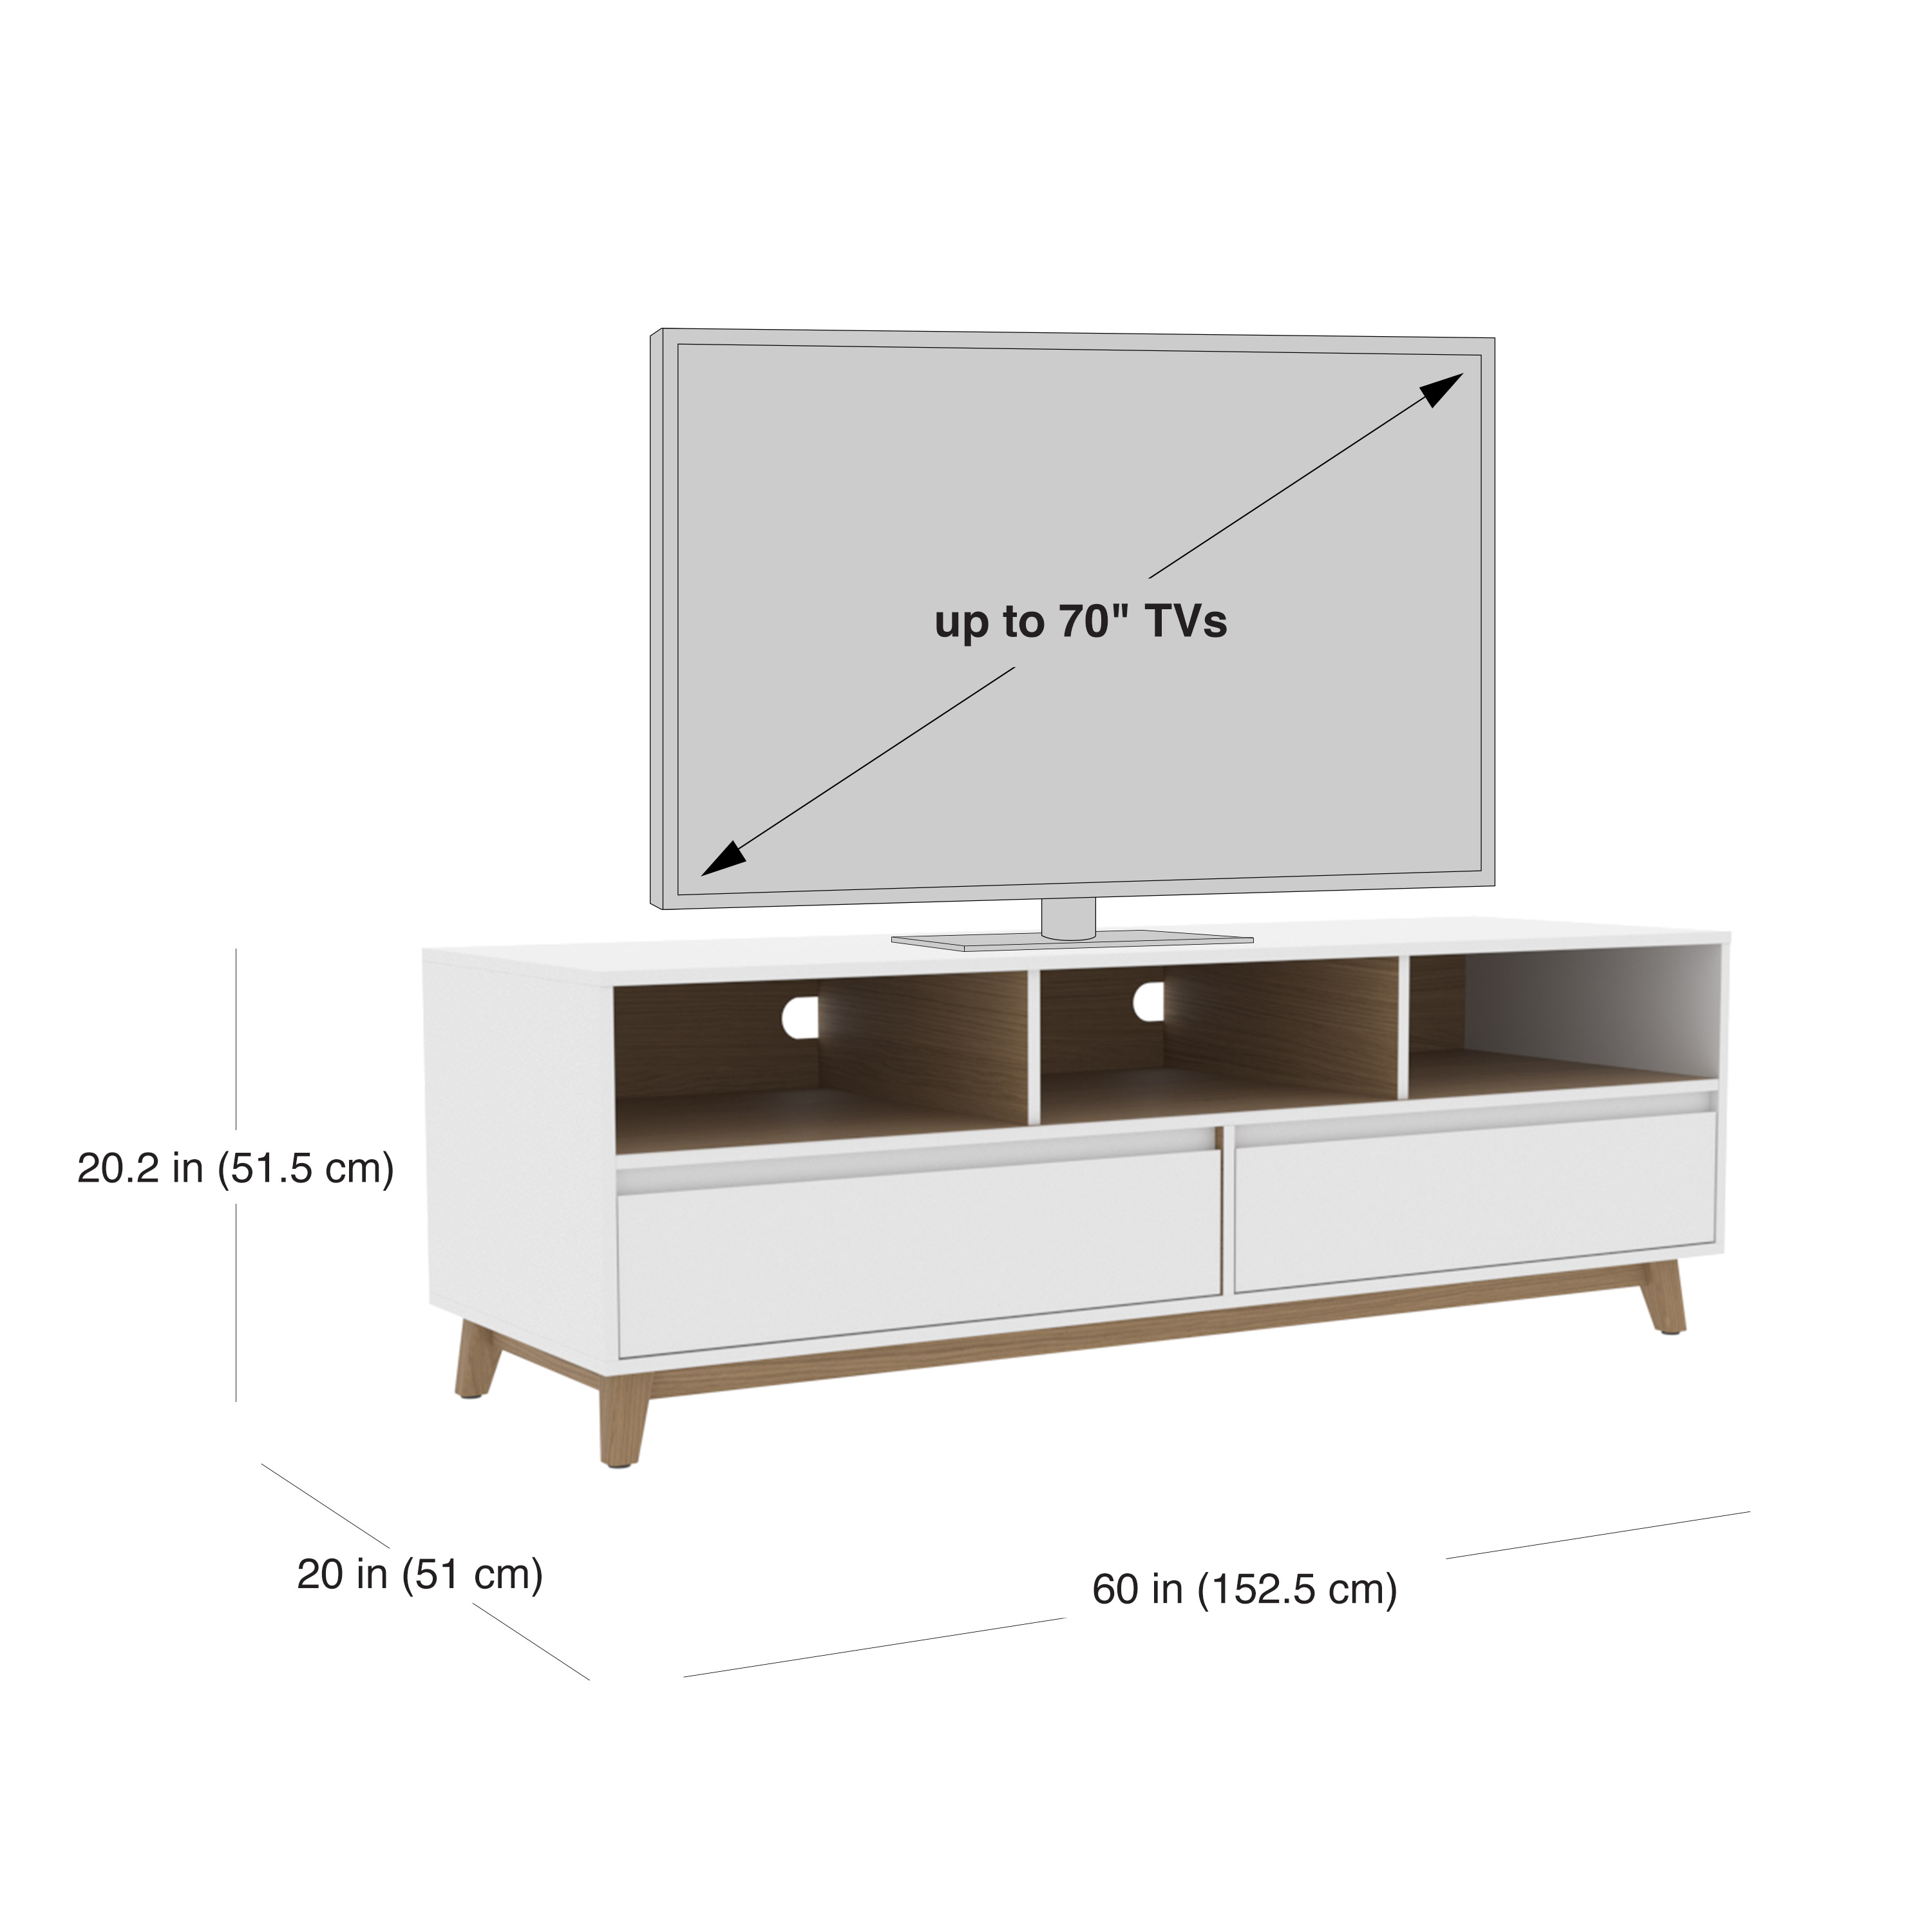 Mainstays Mid-Century TV Stand for TVs up to 70", White Finish - image 2 of 8